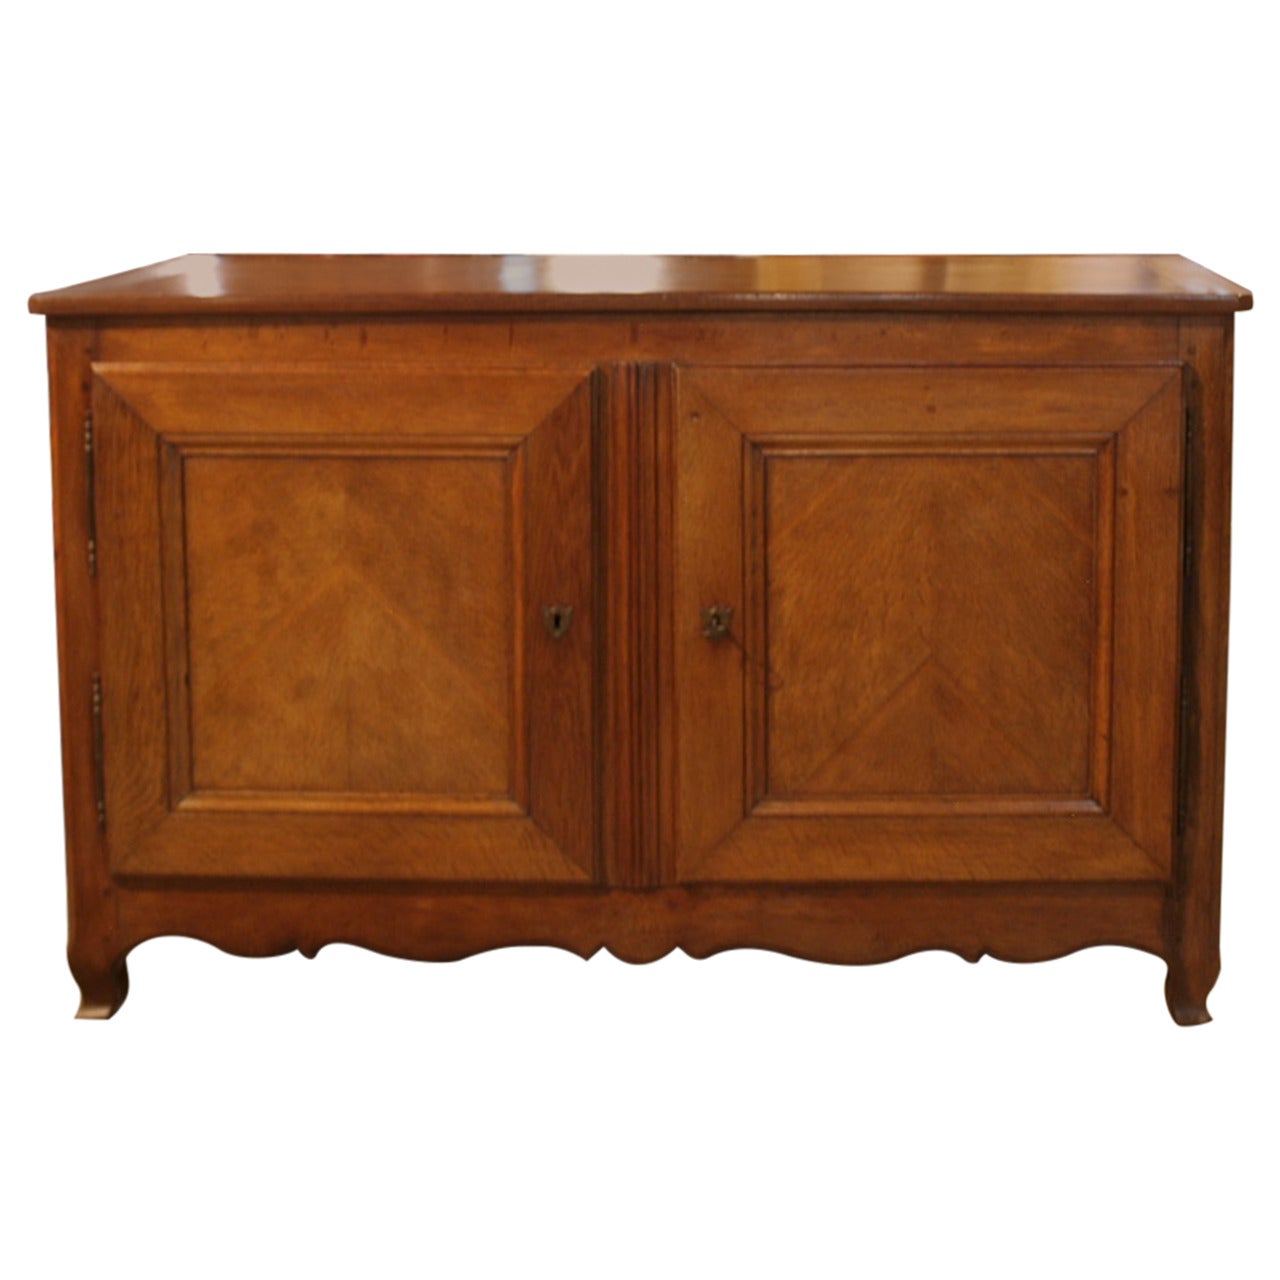 French Mid-19th Century Provençal Lift-Top Buffet